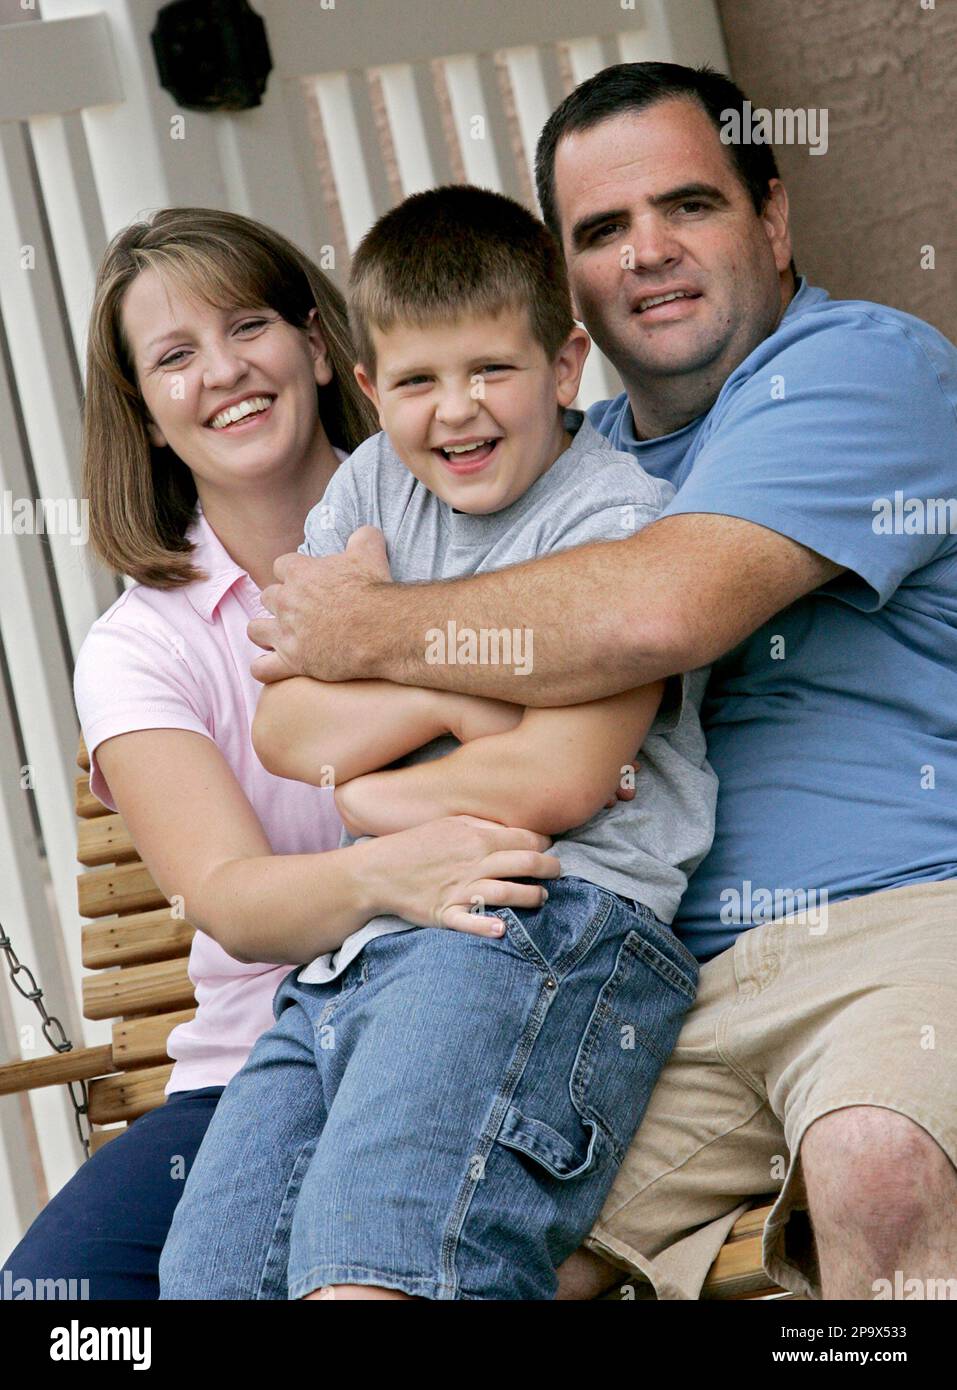 Brandon Merrell, 8, center, sits with his mother Amy Merrell, left, and  father Doug Merrell at their home, Friday, July 11, 2008, in Gilbert,  Ariz., The thought of someone without a medical